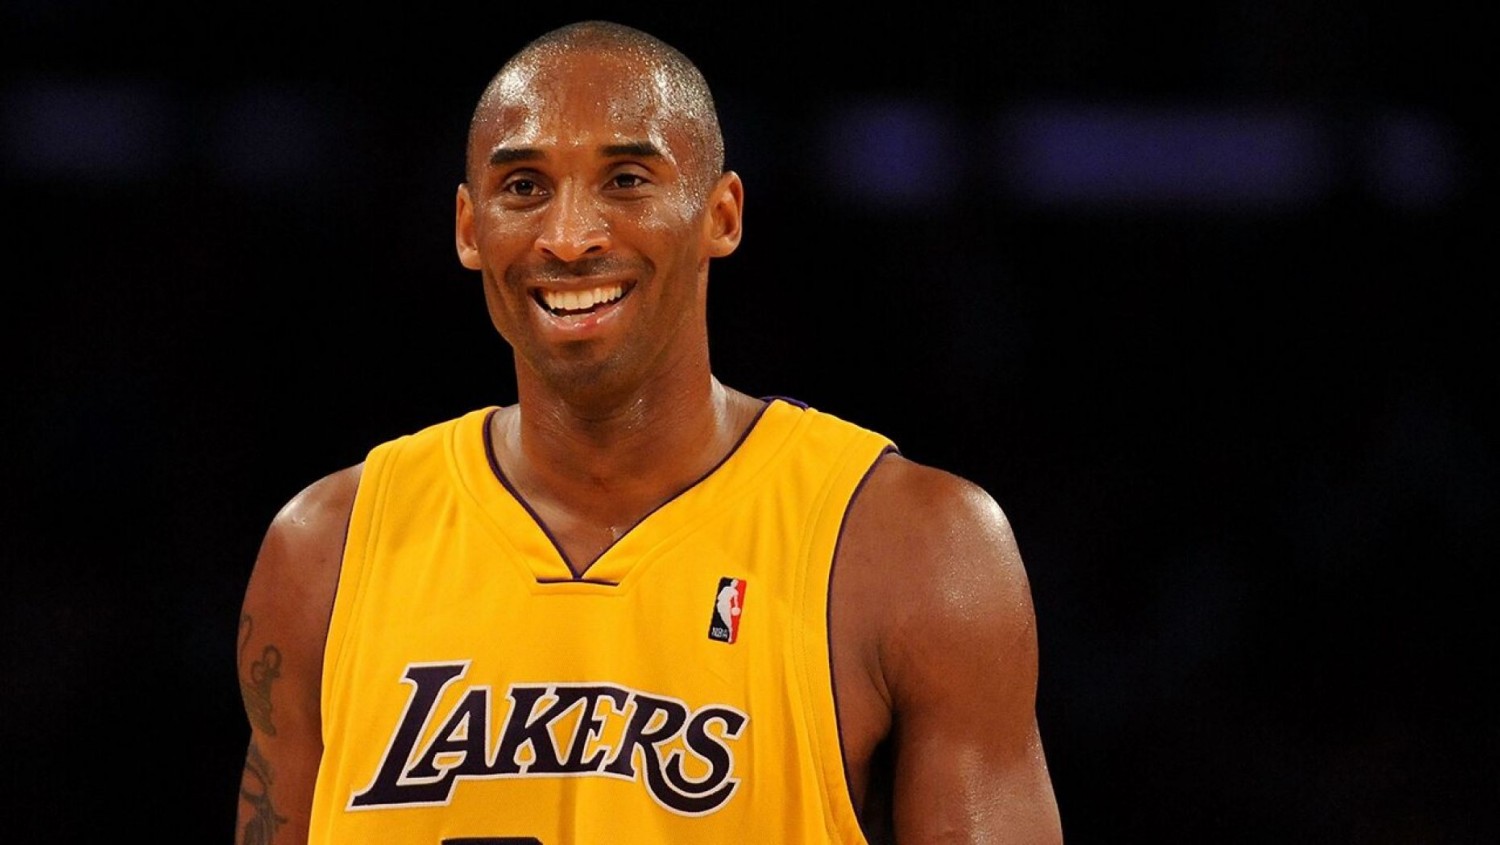 Kobe Bryant played 20 seasons in the NBA. (Photo by Harry How/Getty Images)